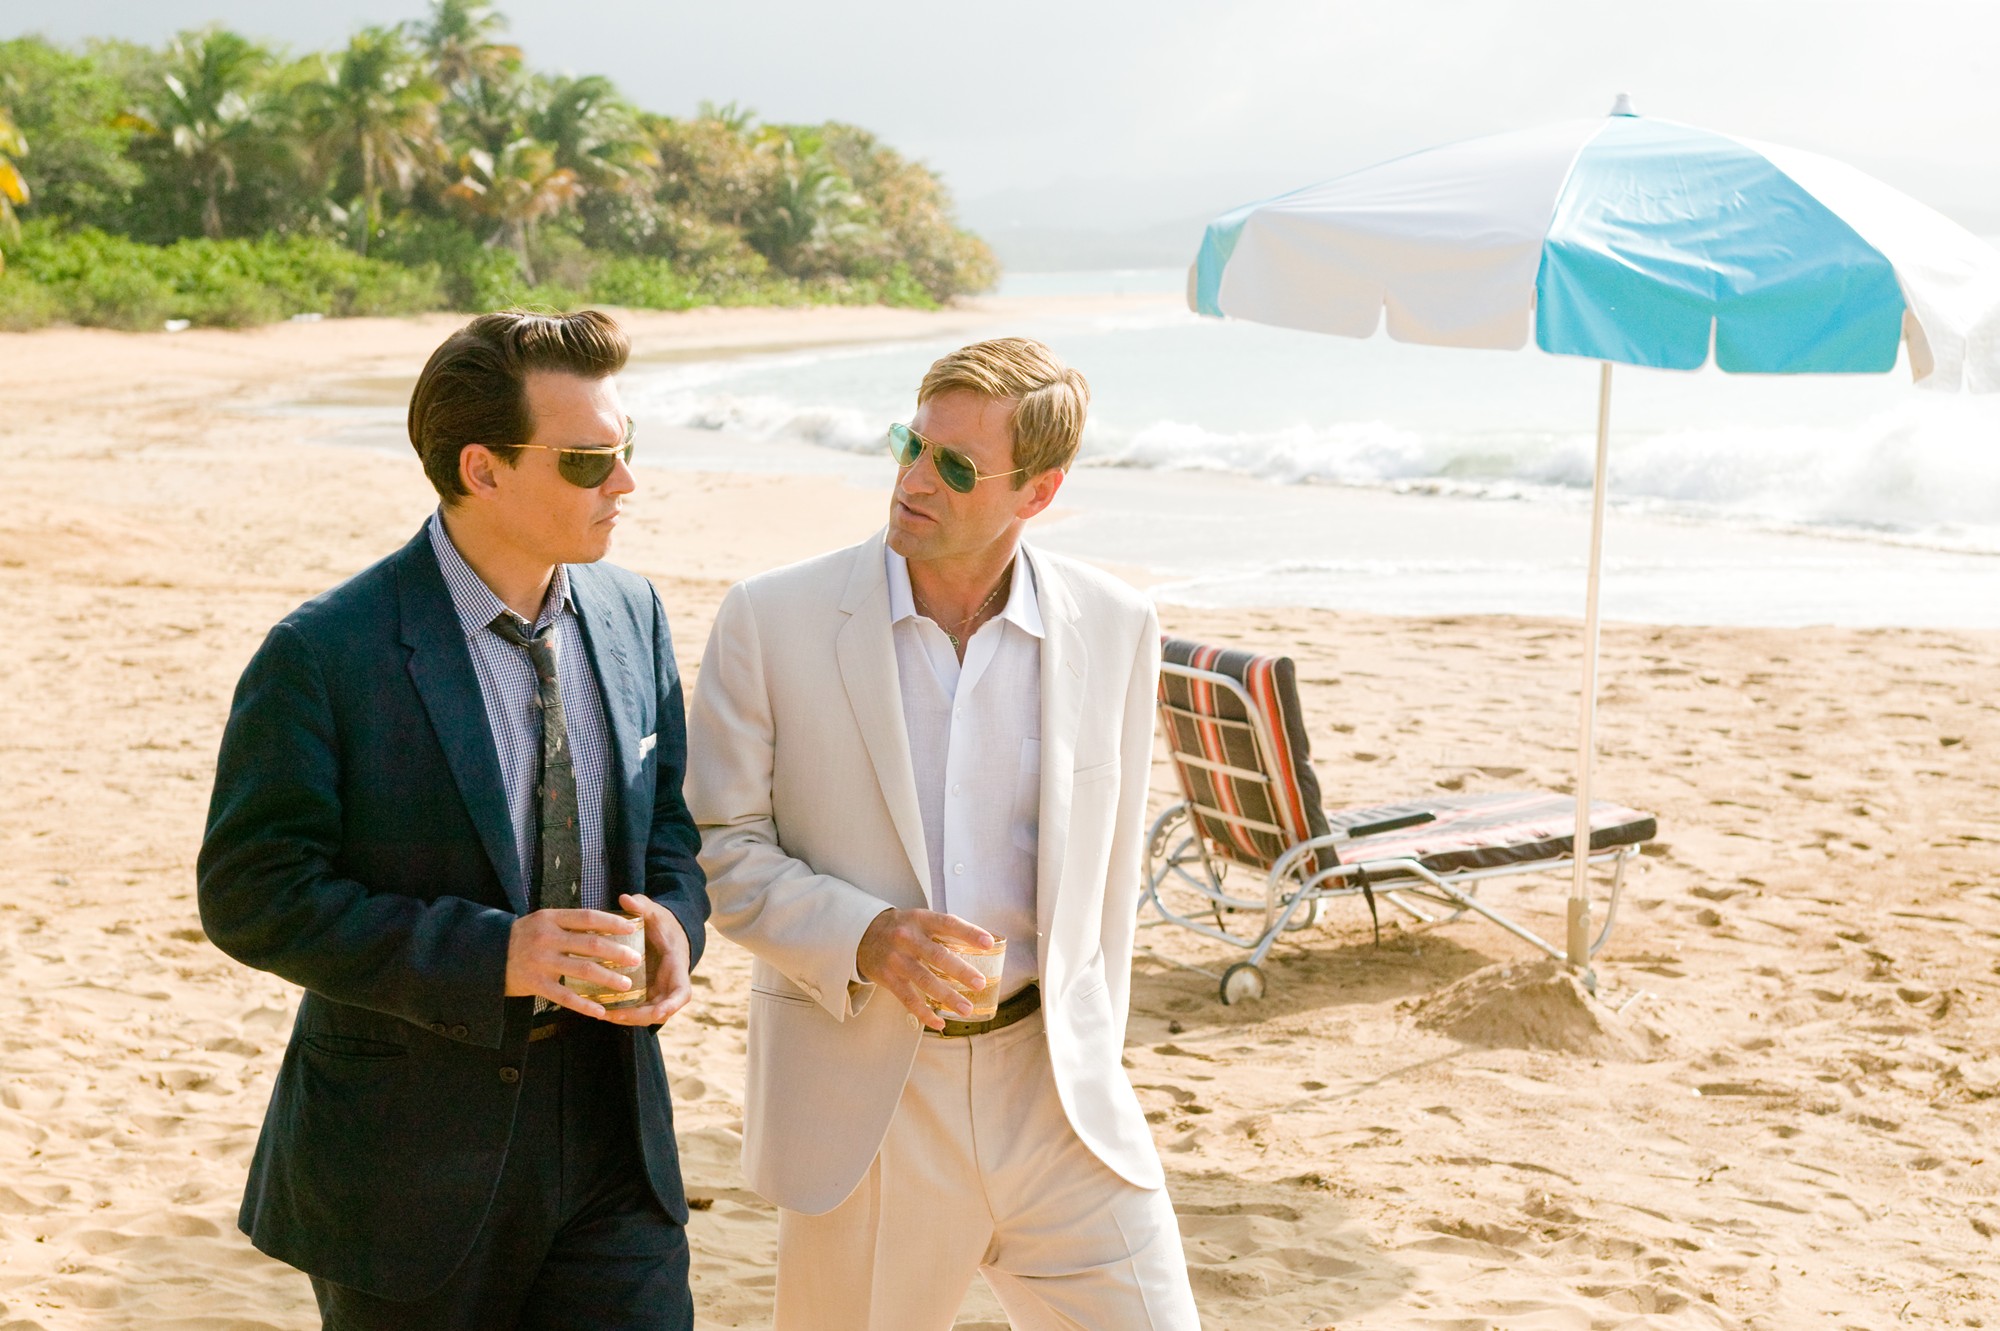 Johnny Depp stars as Paul Kemp and Aaron Eckhart stars as Sanderson in FilmDistrict's The Rum Diary (2011)